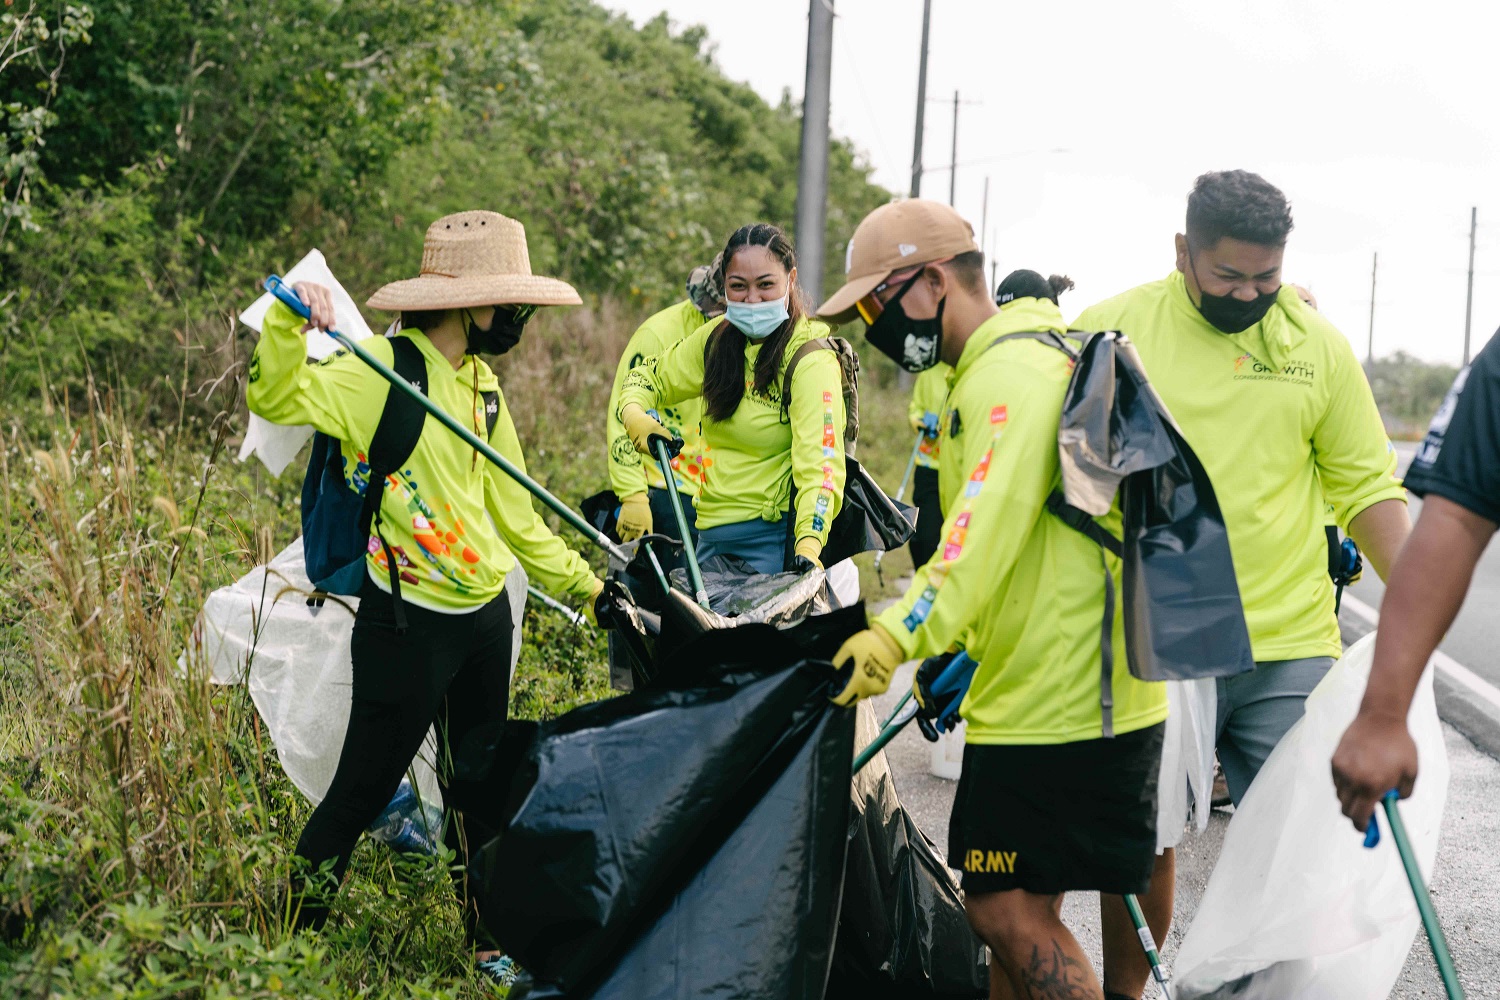 Members of the Guam Green Growth Conservation Corps cleaning side of the streets.